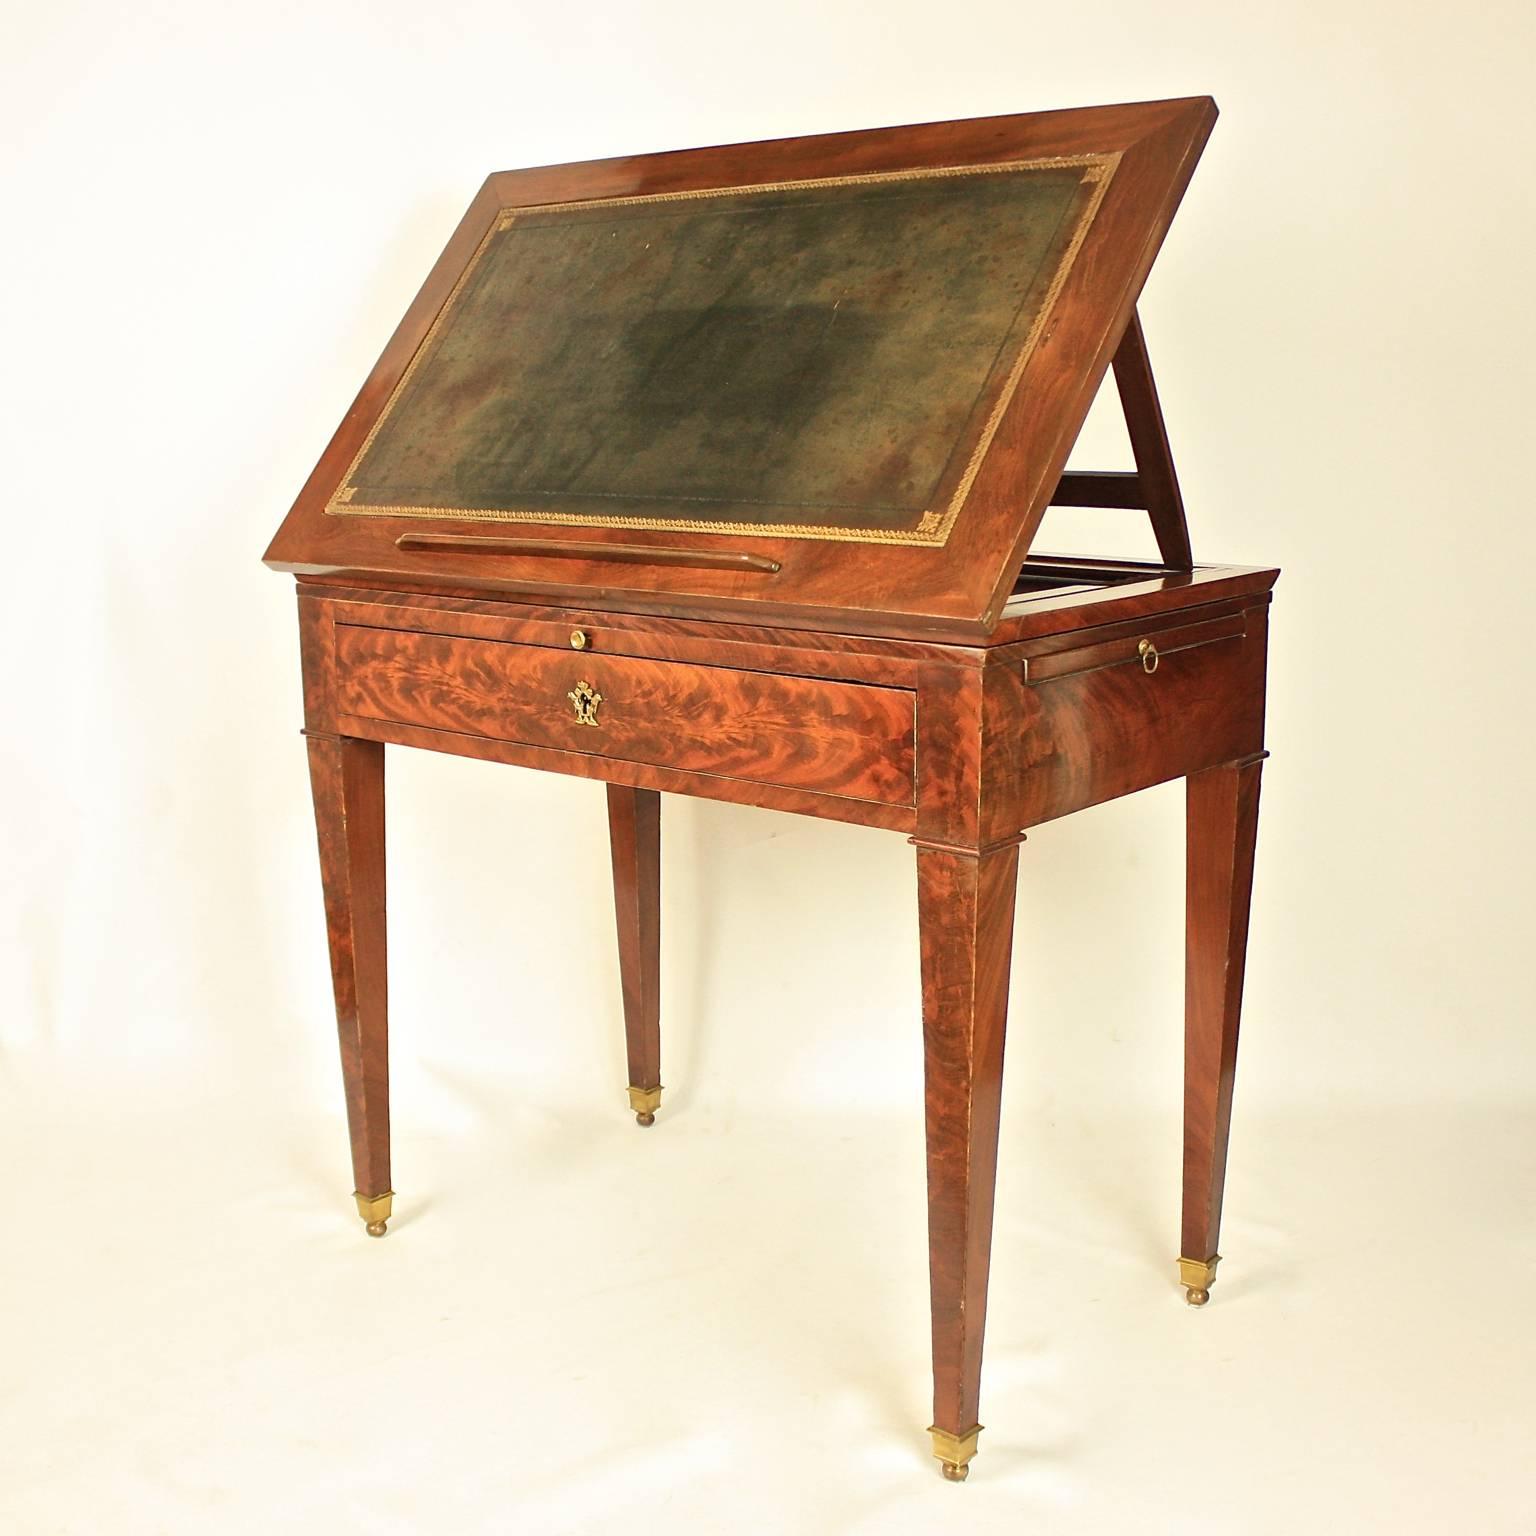 French Late 18th Century Mahogany Veneered Architect's Table, workshop of J.J. Chapuis